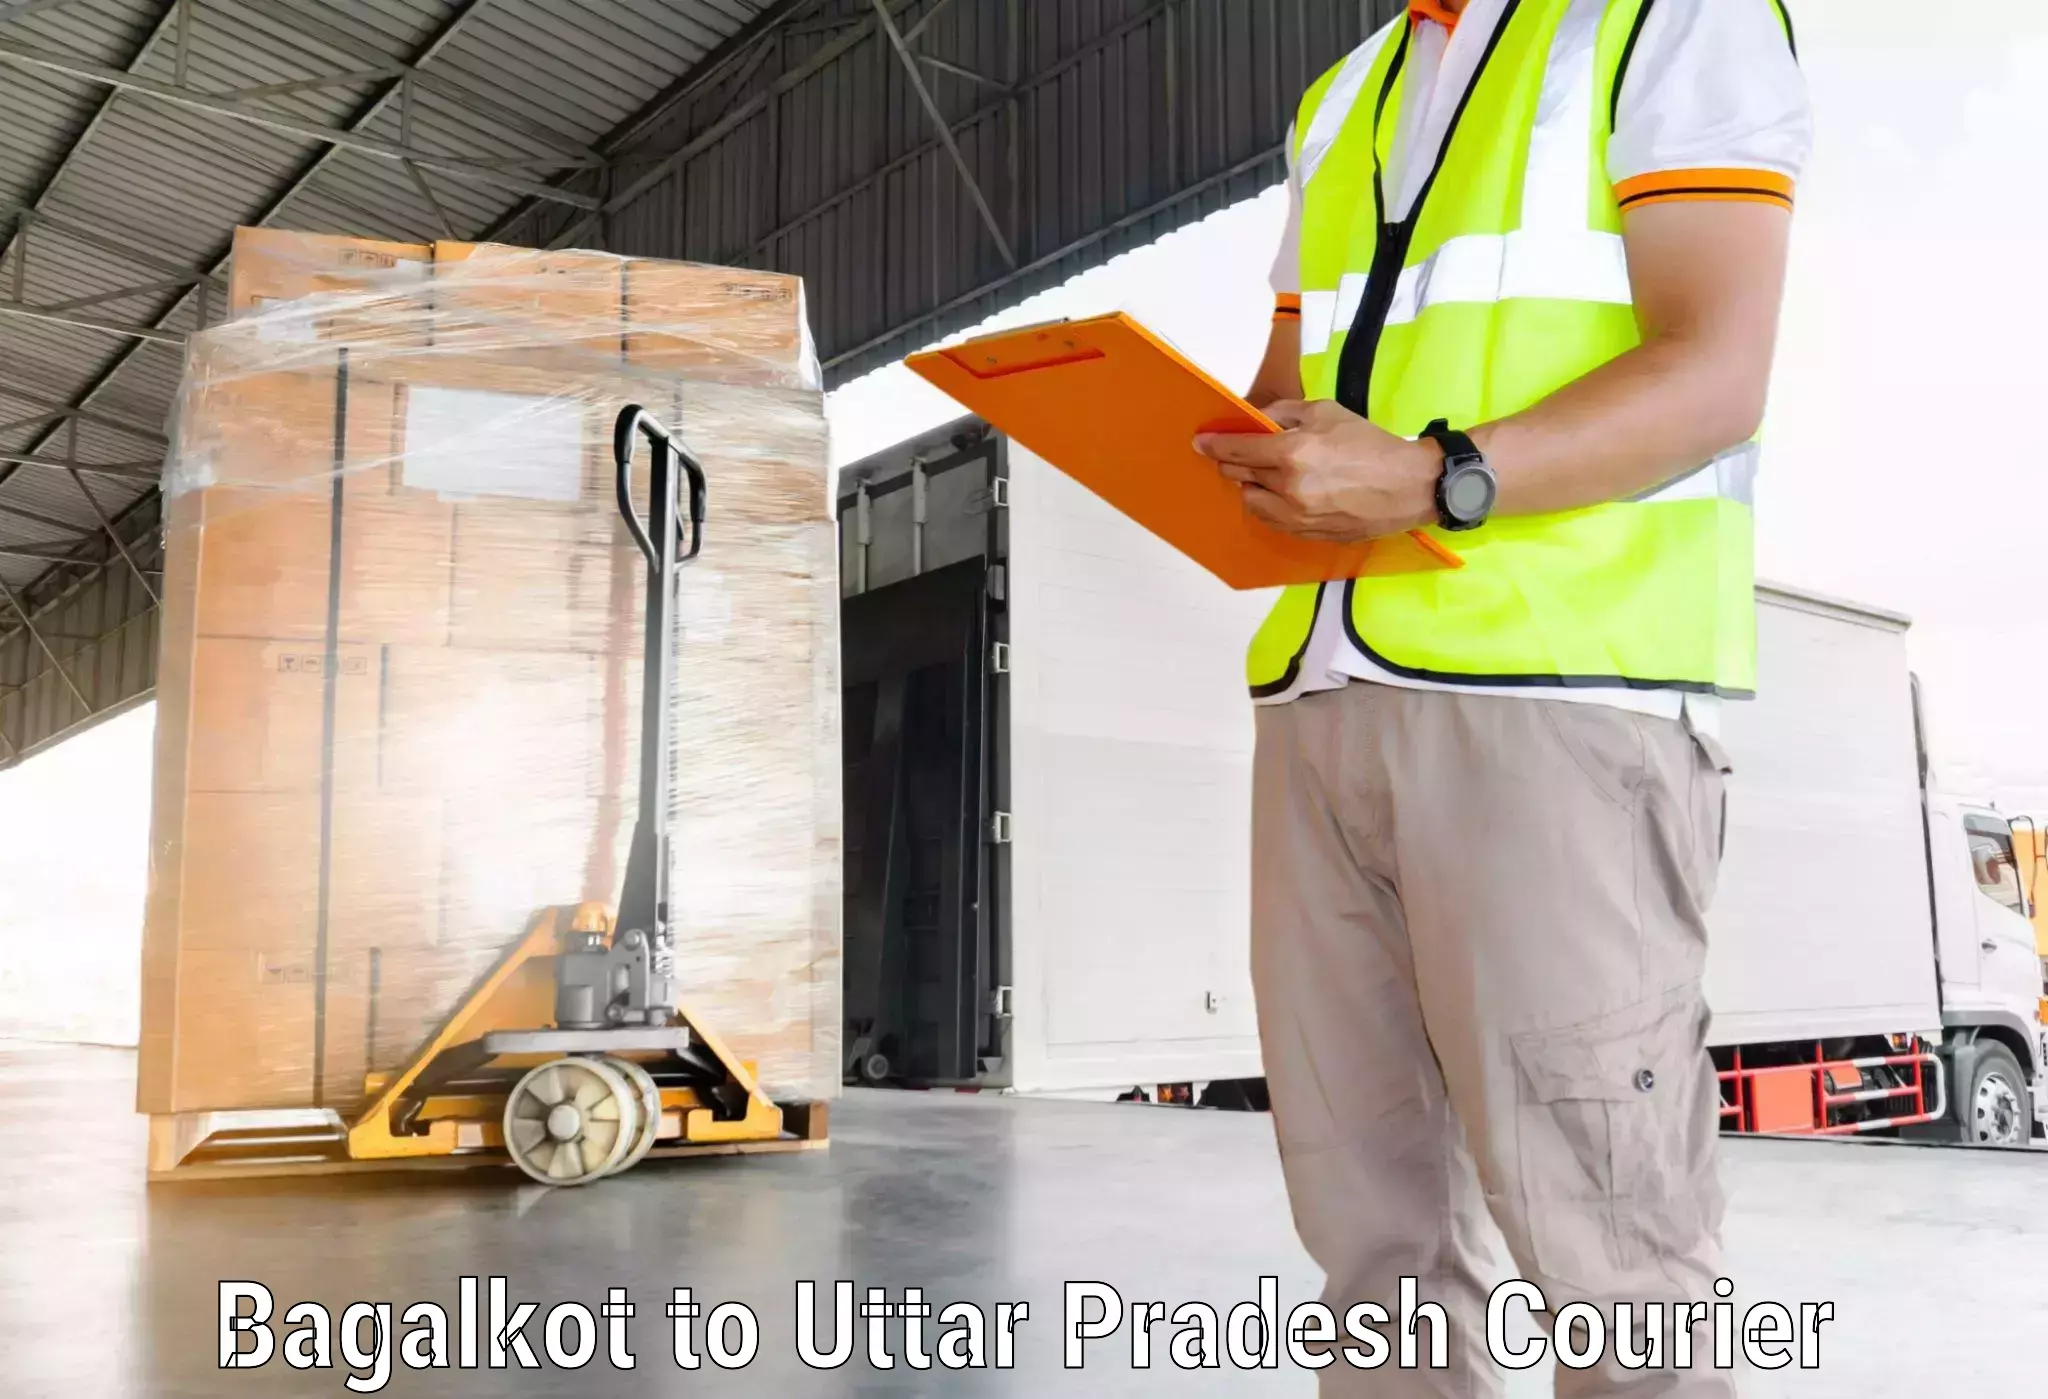 State-of-the-art courier technology Bagalkot to Auraiya